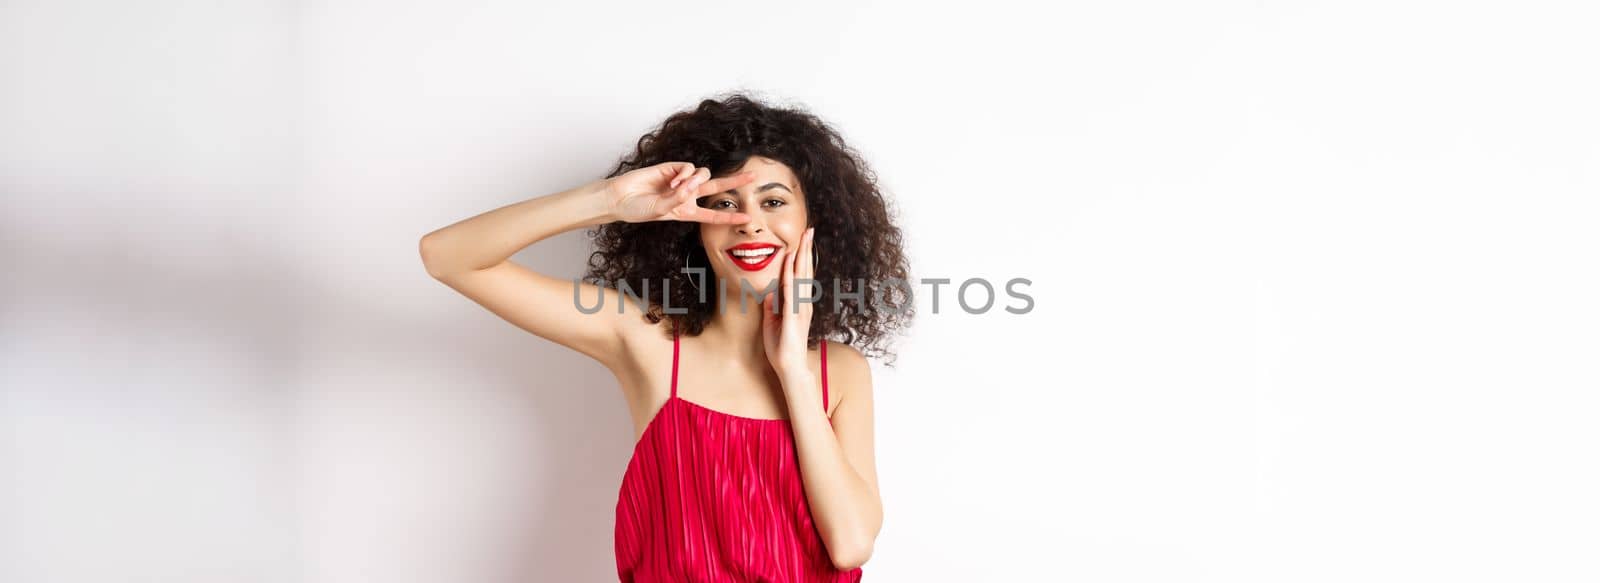 Beauty and fashion. Romantic woman with curly hair and red dress, showing v-sign and smiling happy at camera, standing on white background.